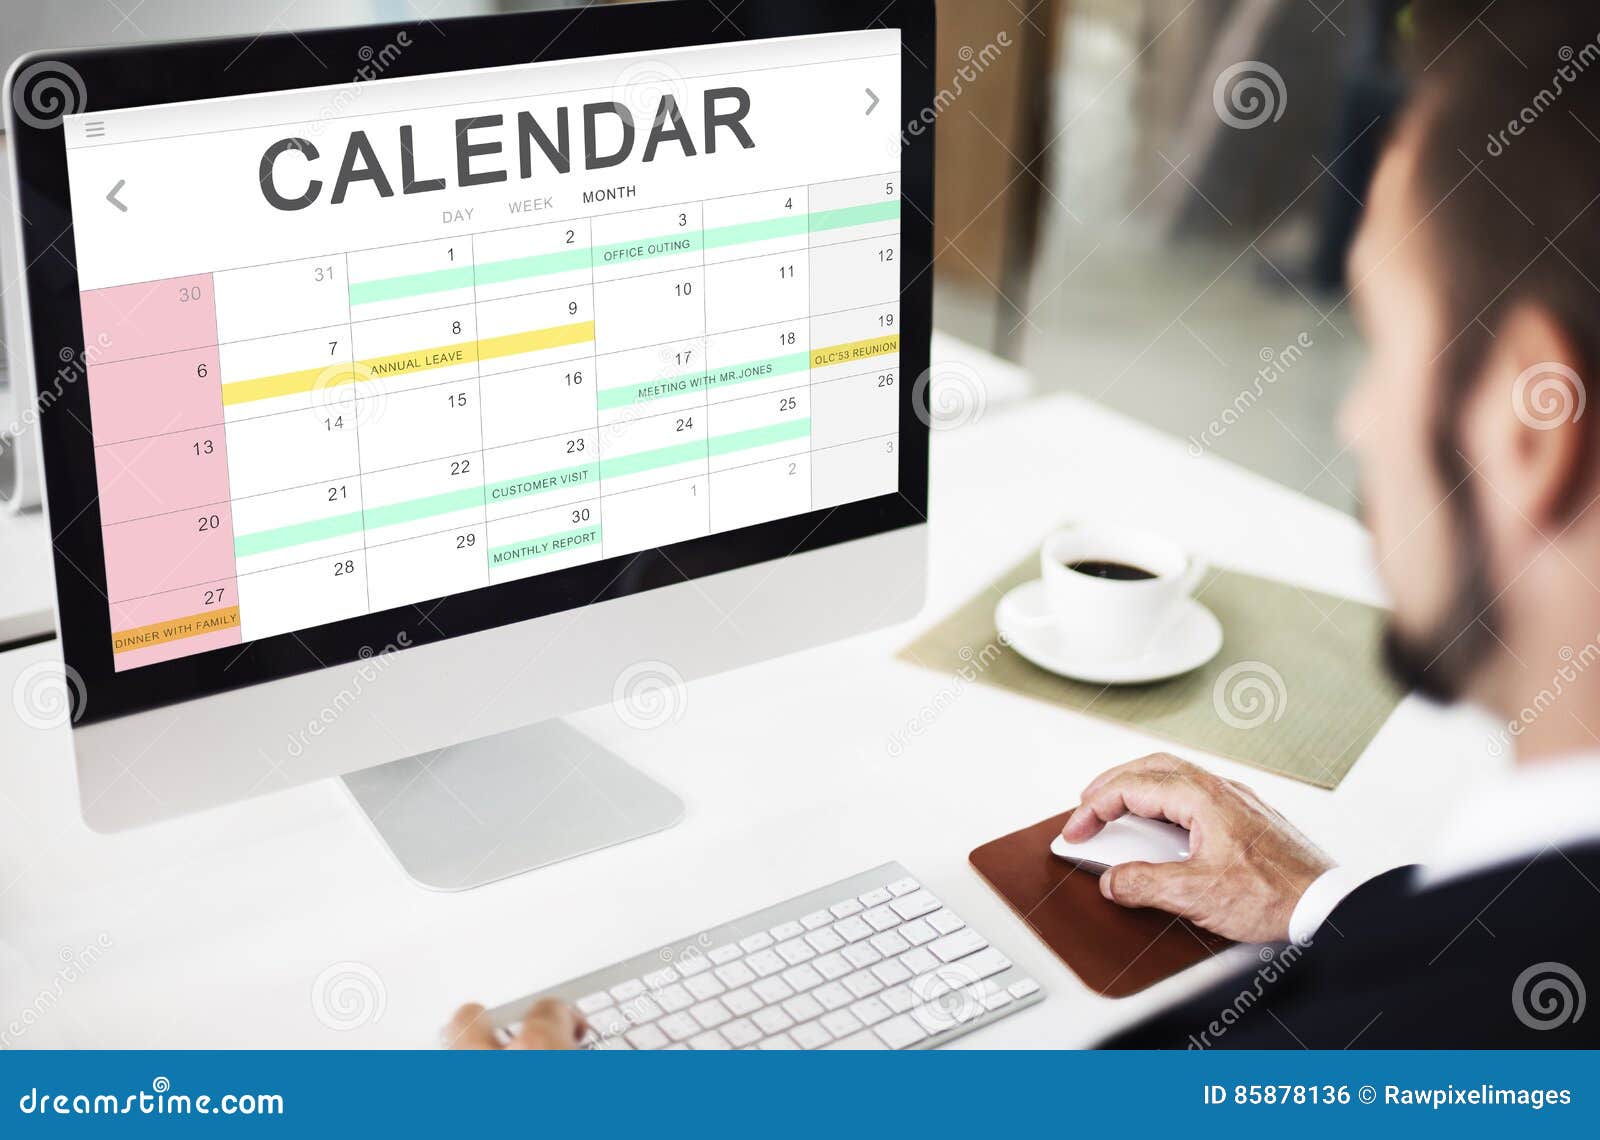 Calendar Agenda Event Meeting Reminder Schedule Graphic Concept Stock Photo - Image of ...